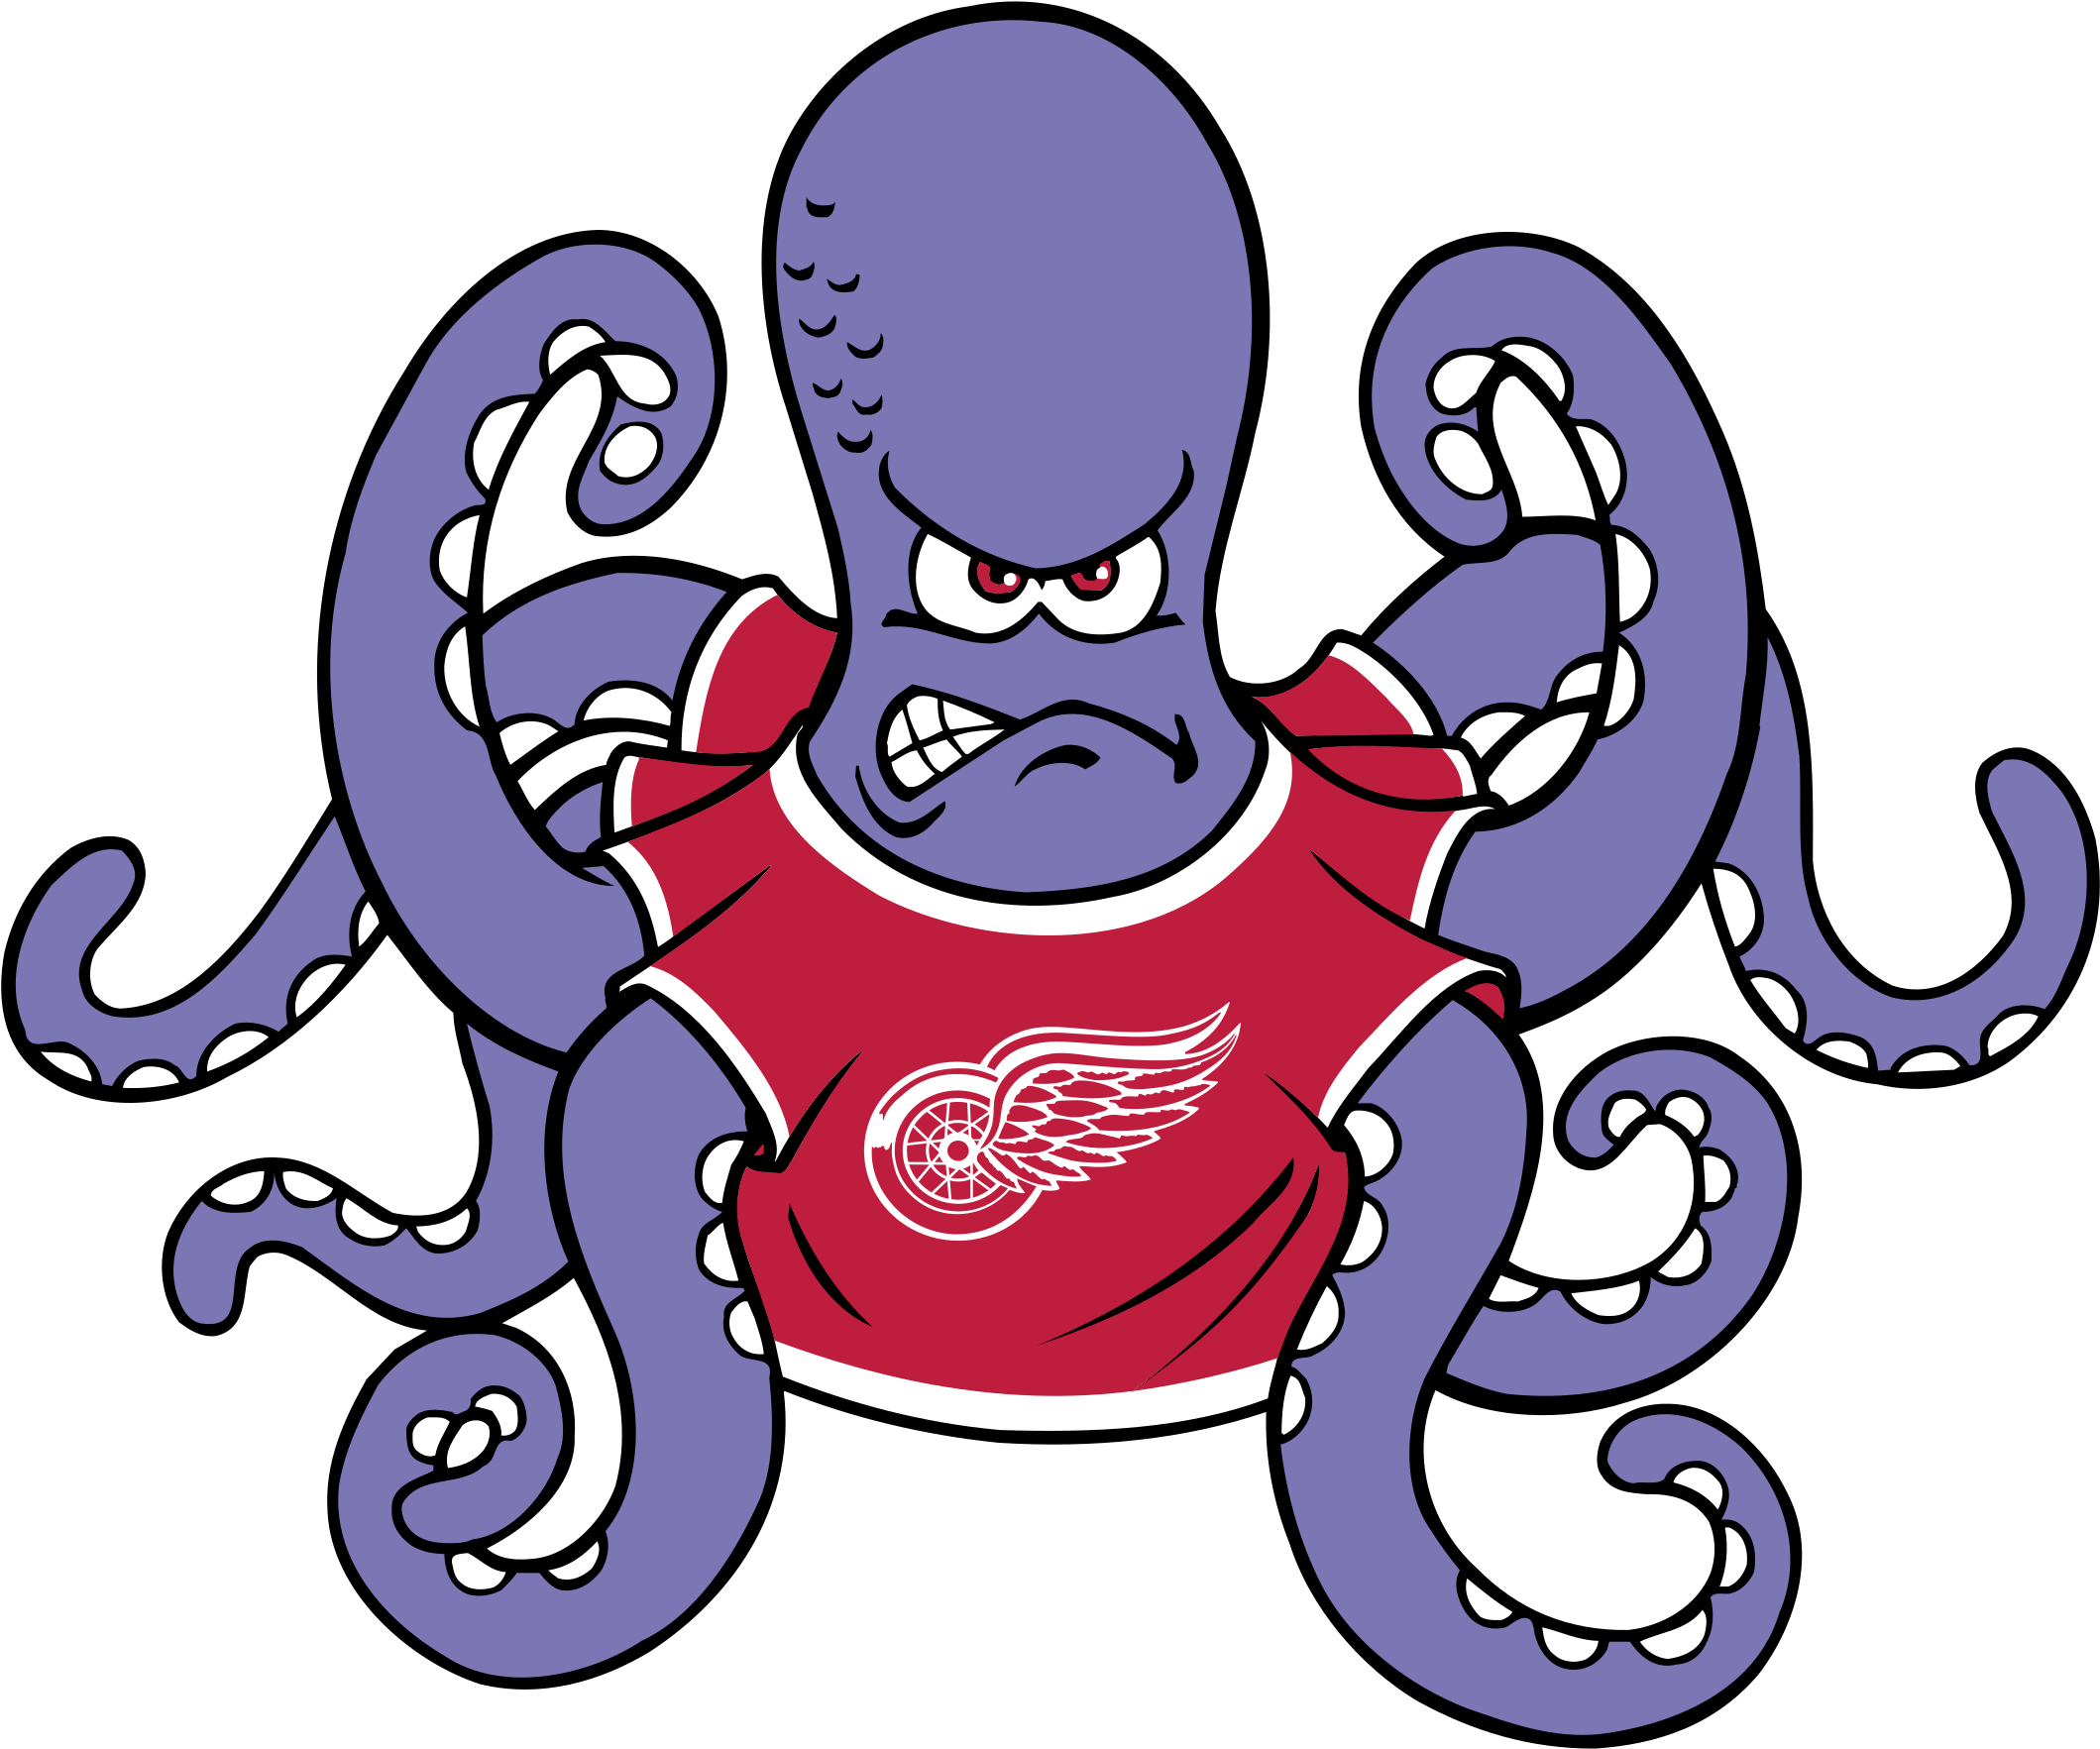 Detroit Red Wings Logo Png Transparent Svg Vector Freebie - Detroit Red Wings Octopus (2400x2400)